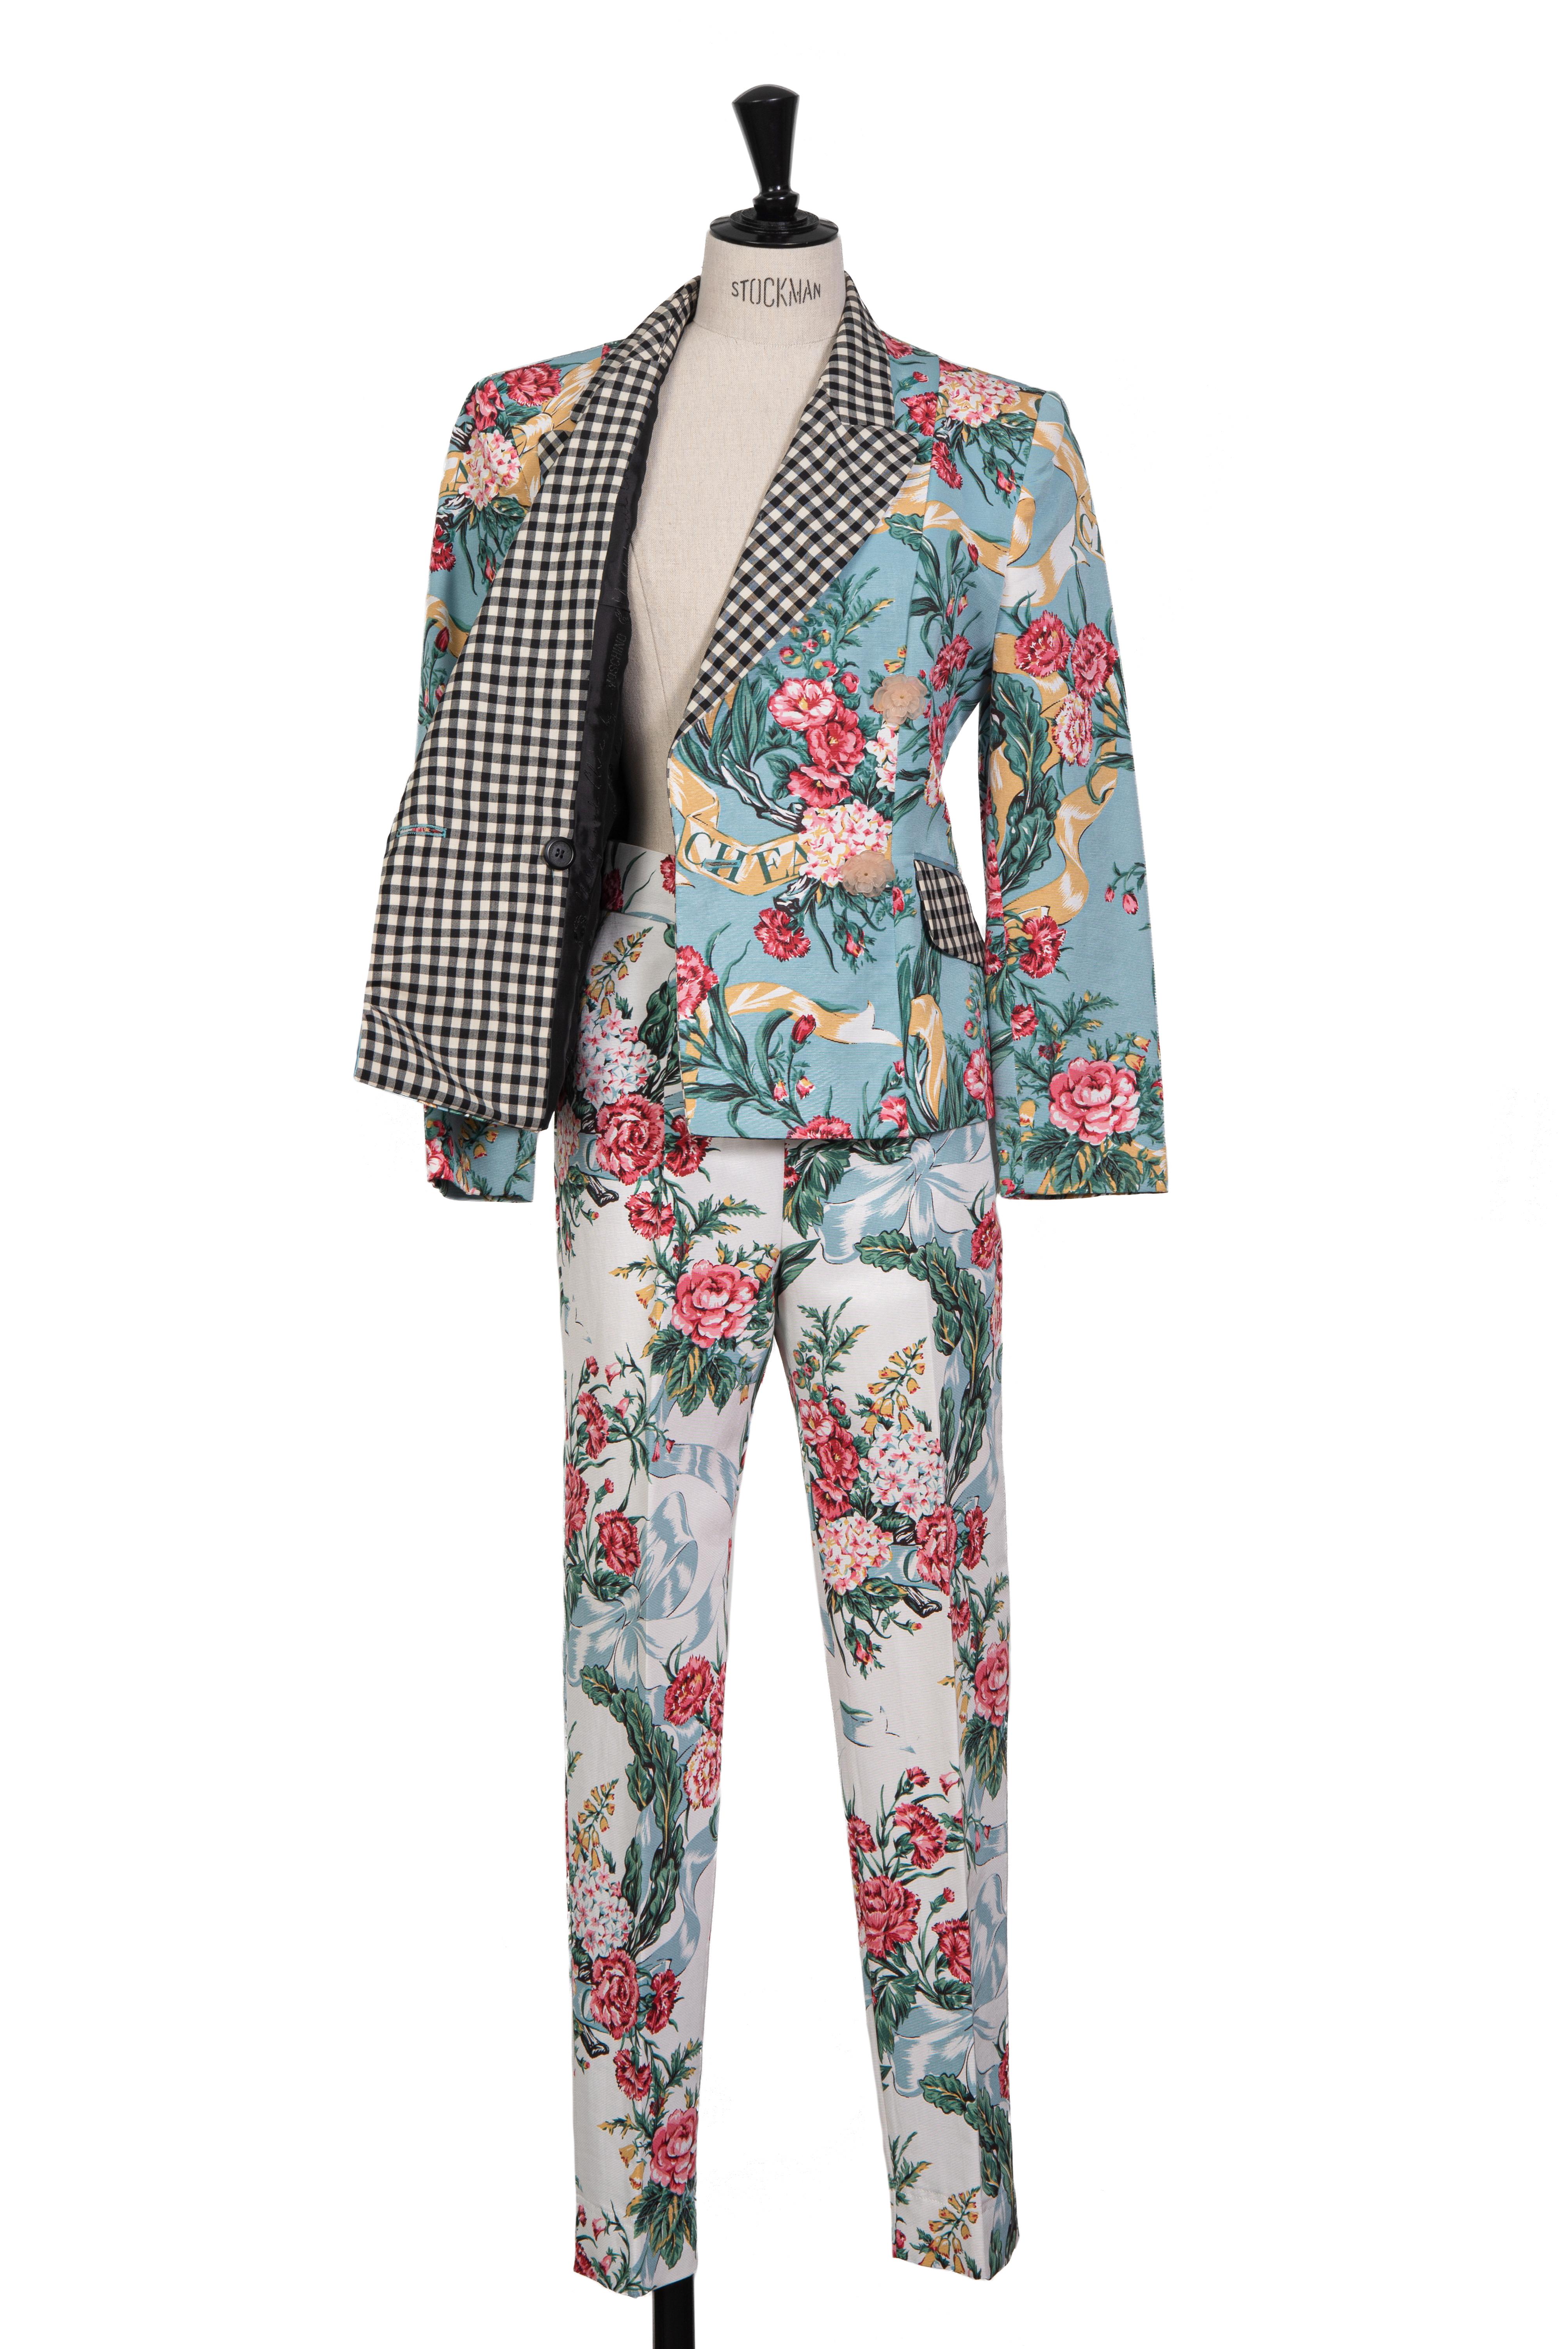 Early 1990s MOSCHINO Blue White Pink Floral & Check Print Jacket & Pant Suit For Sale 1